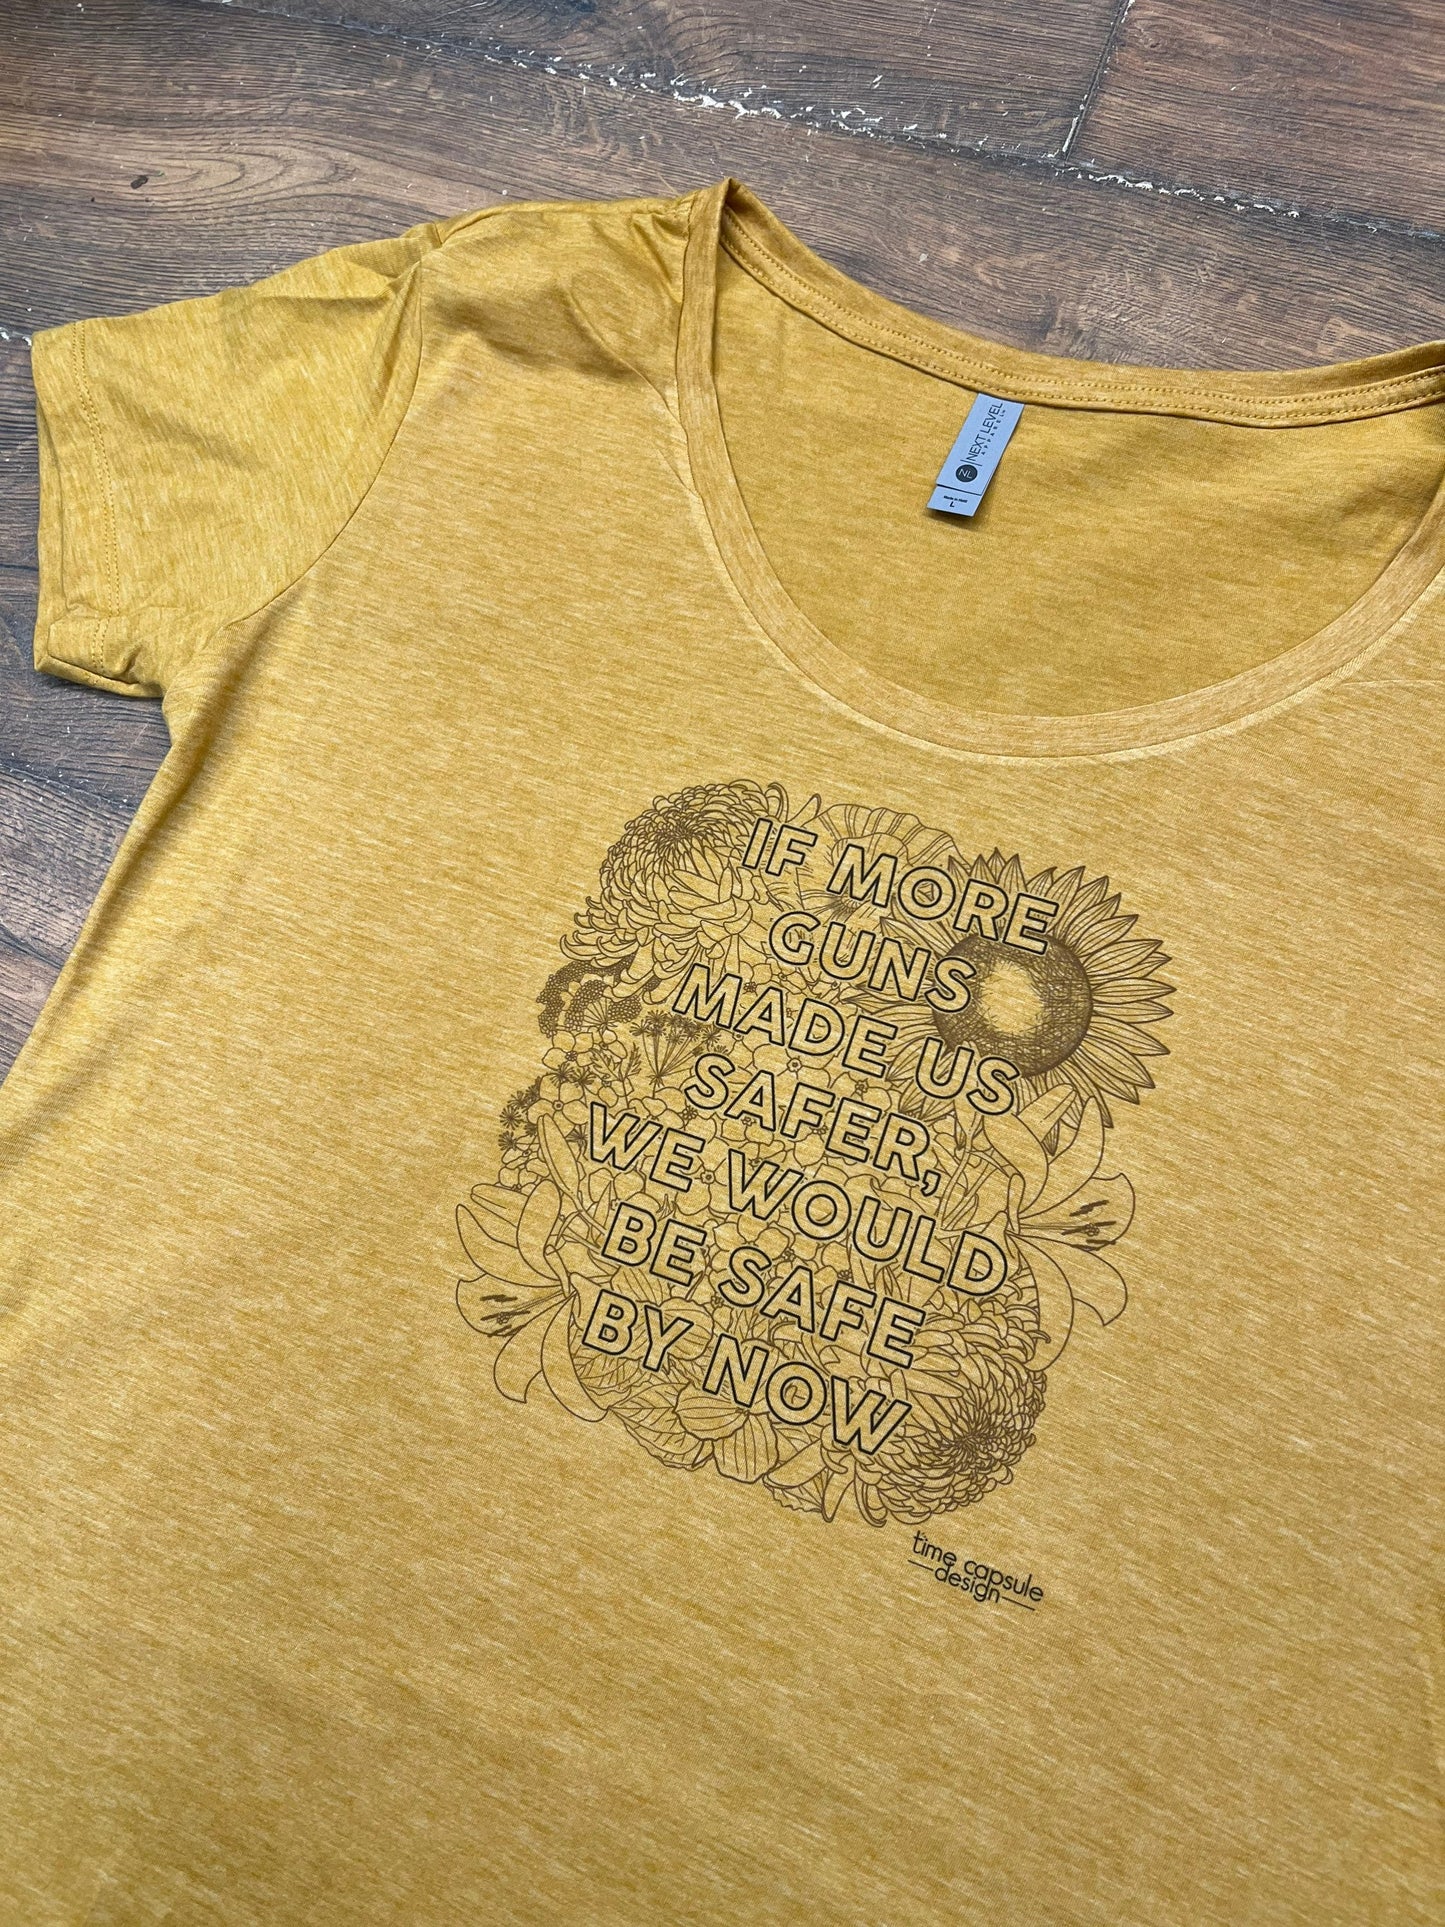 If More Guns Made Us Safer We Would Be Safe By Now SCOOP NECK Golden Yellow Tee